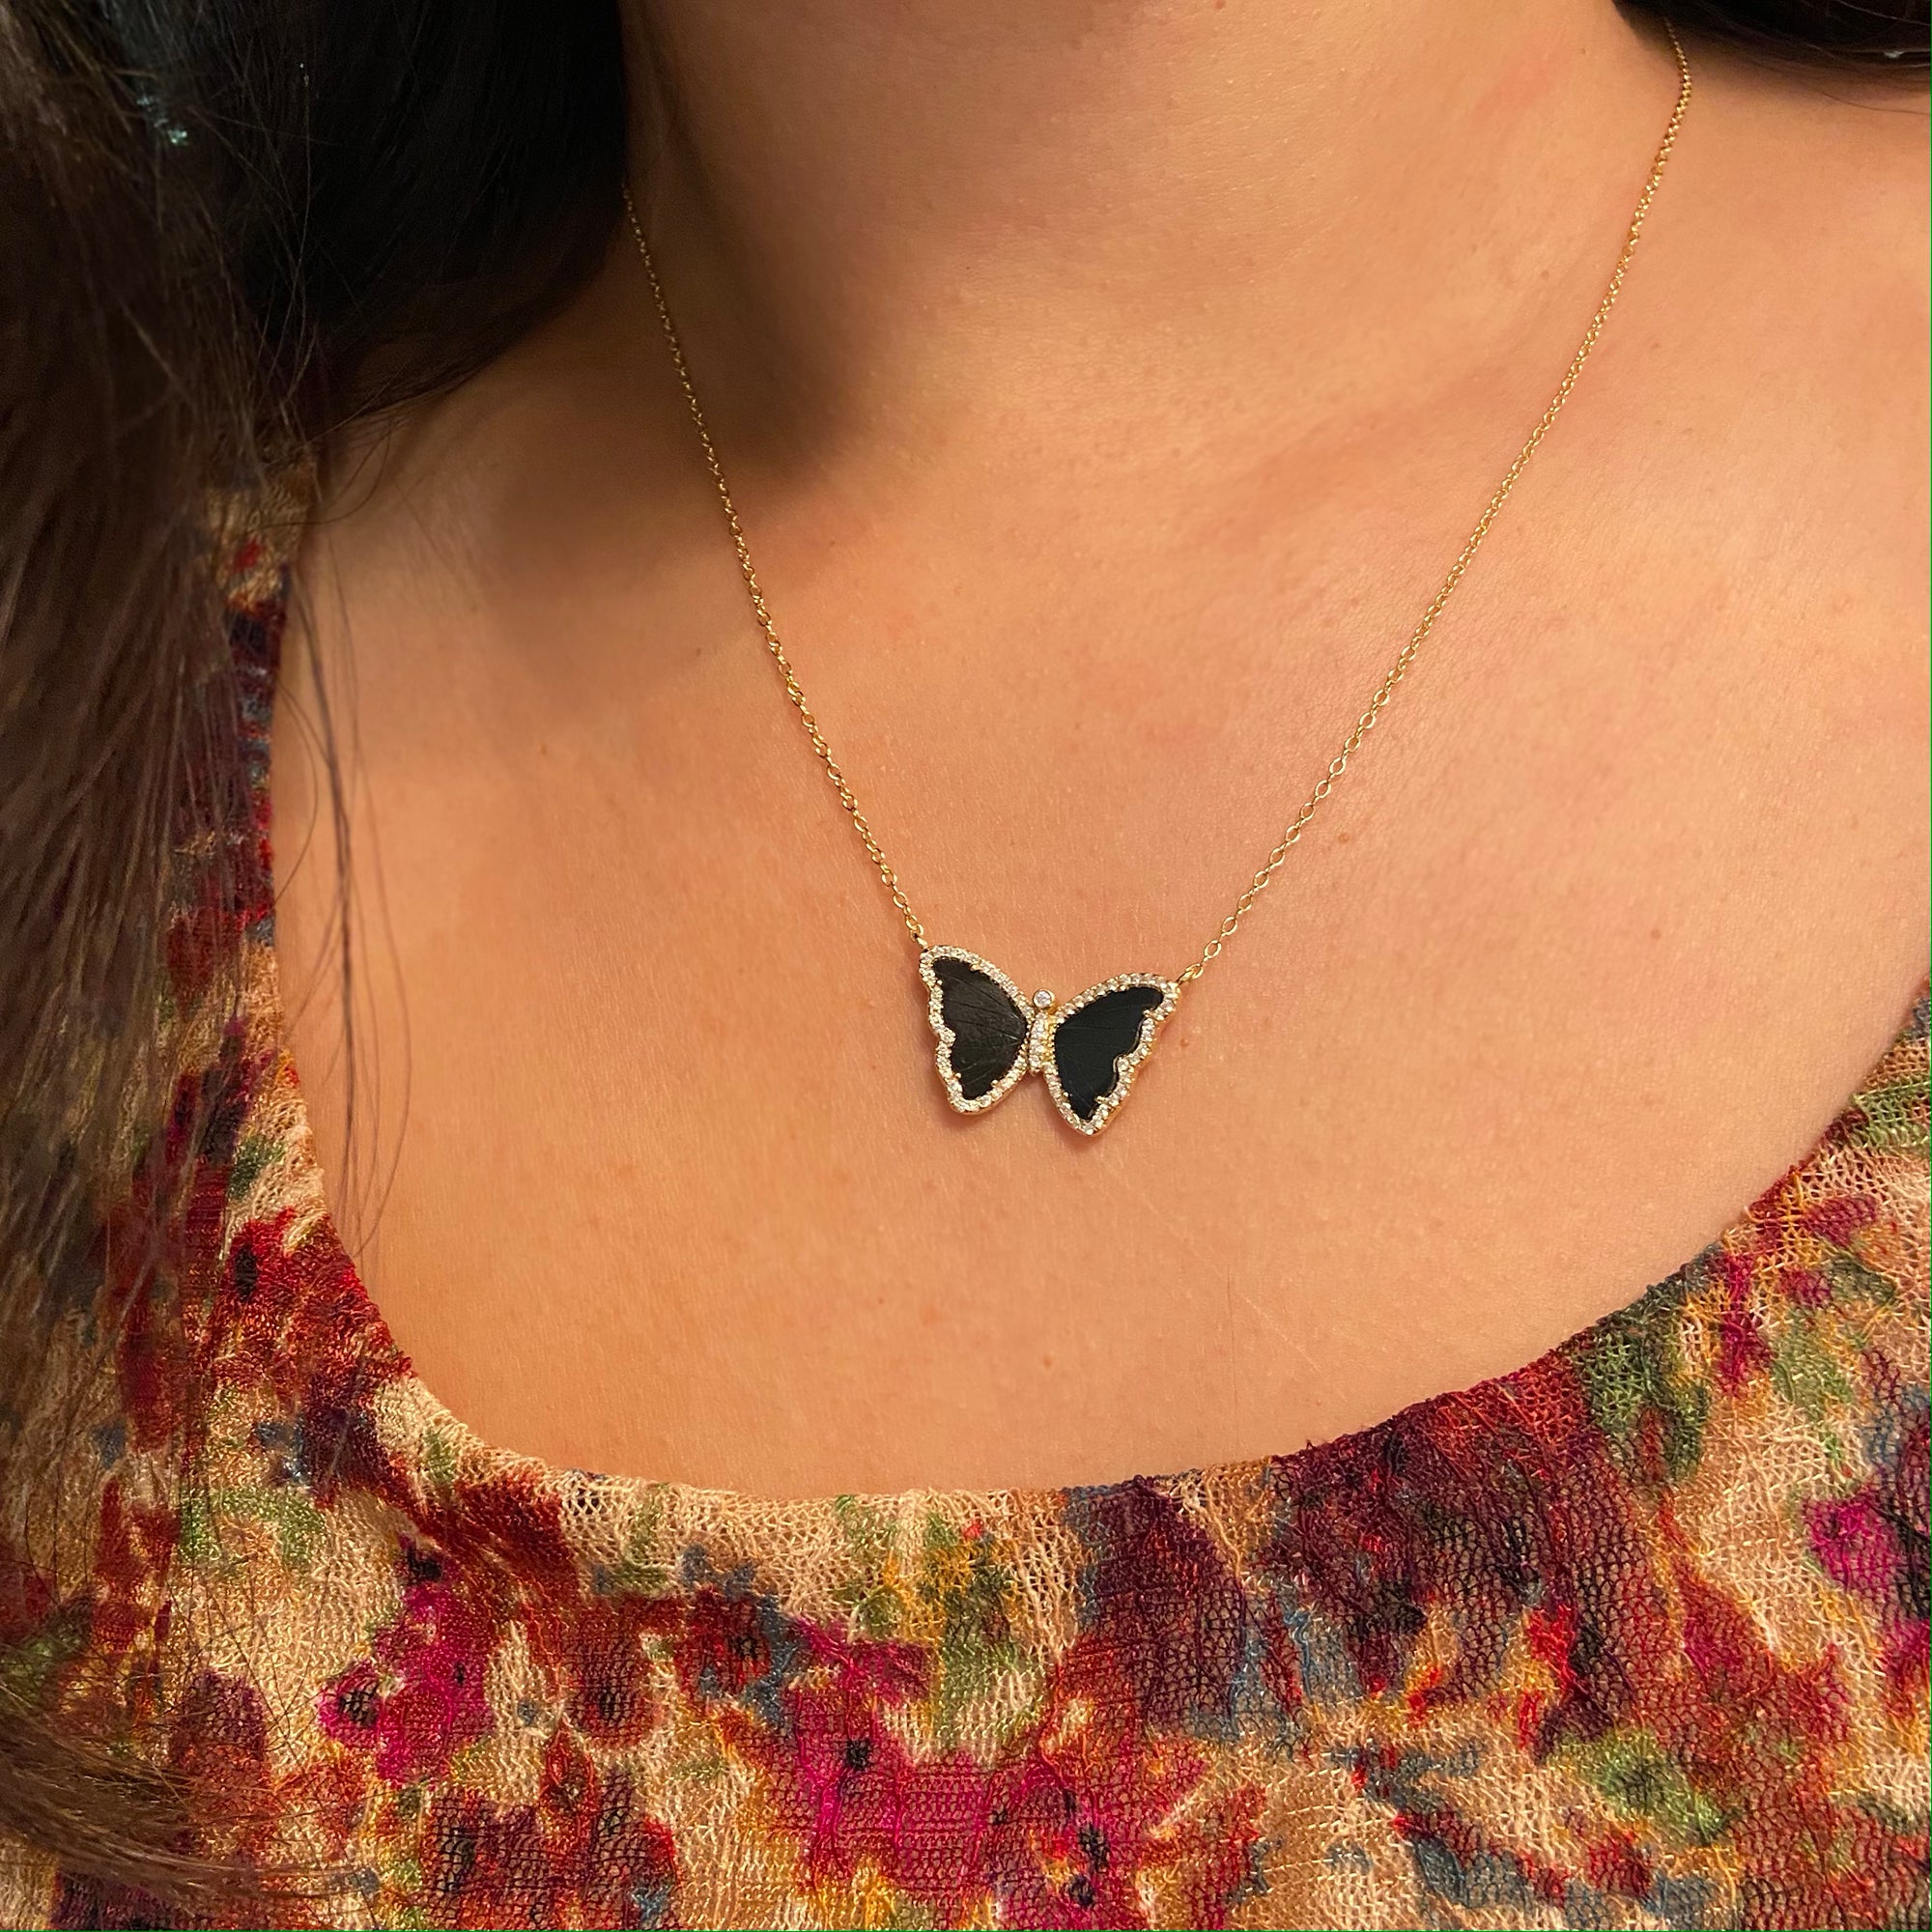 Fly away with these delicate @vancleefarpels butterfly necklaces accented  with… | Stylish jewelry, Girly jewelry, Gold jewelry fashion